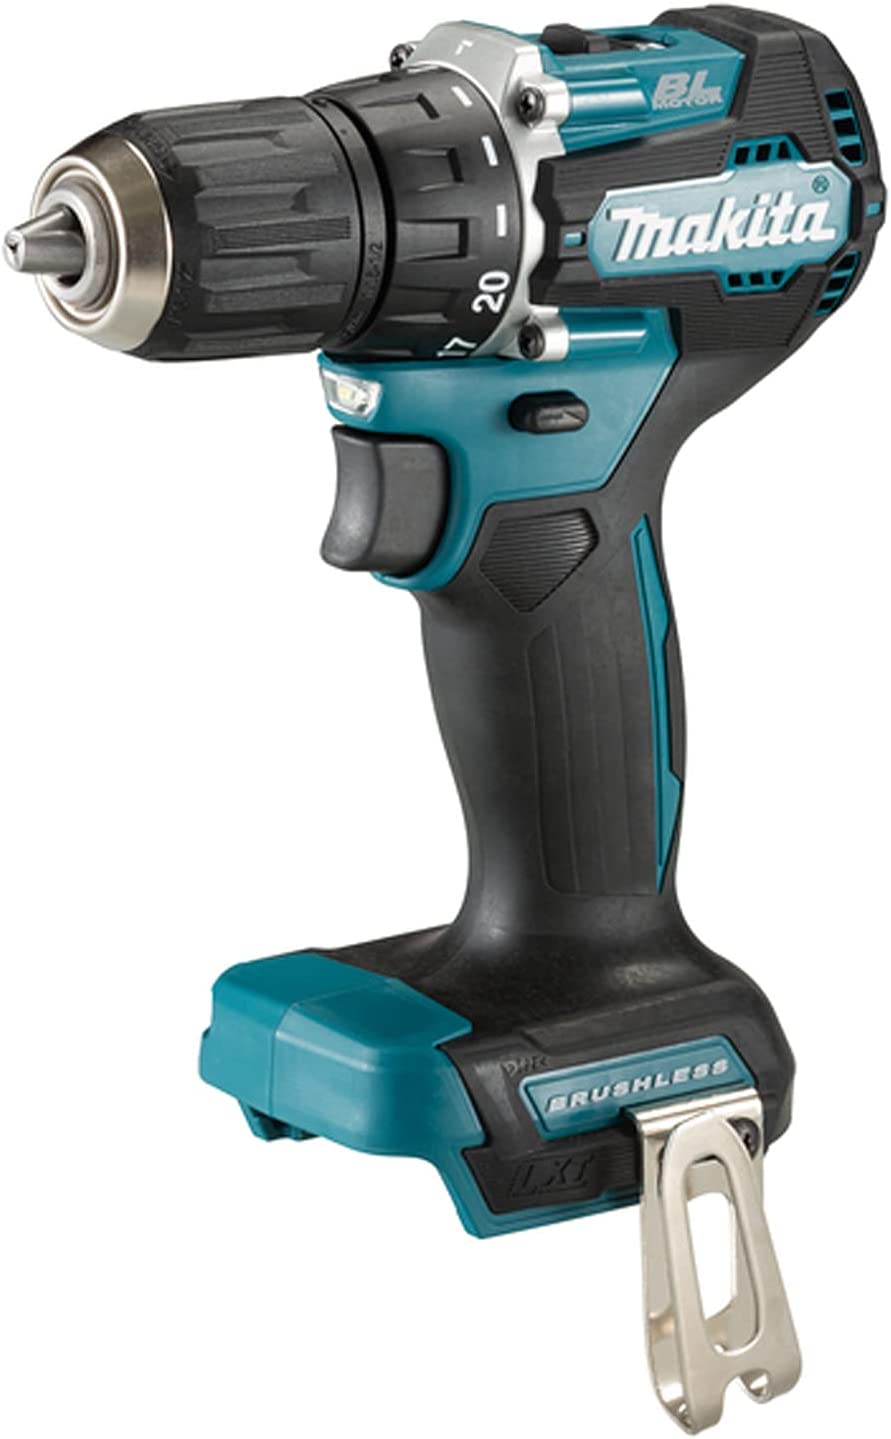 Makita DDF487Z 18V Li-ion LXT Brushless Drill Driver  Batteries and Charger Not Included